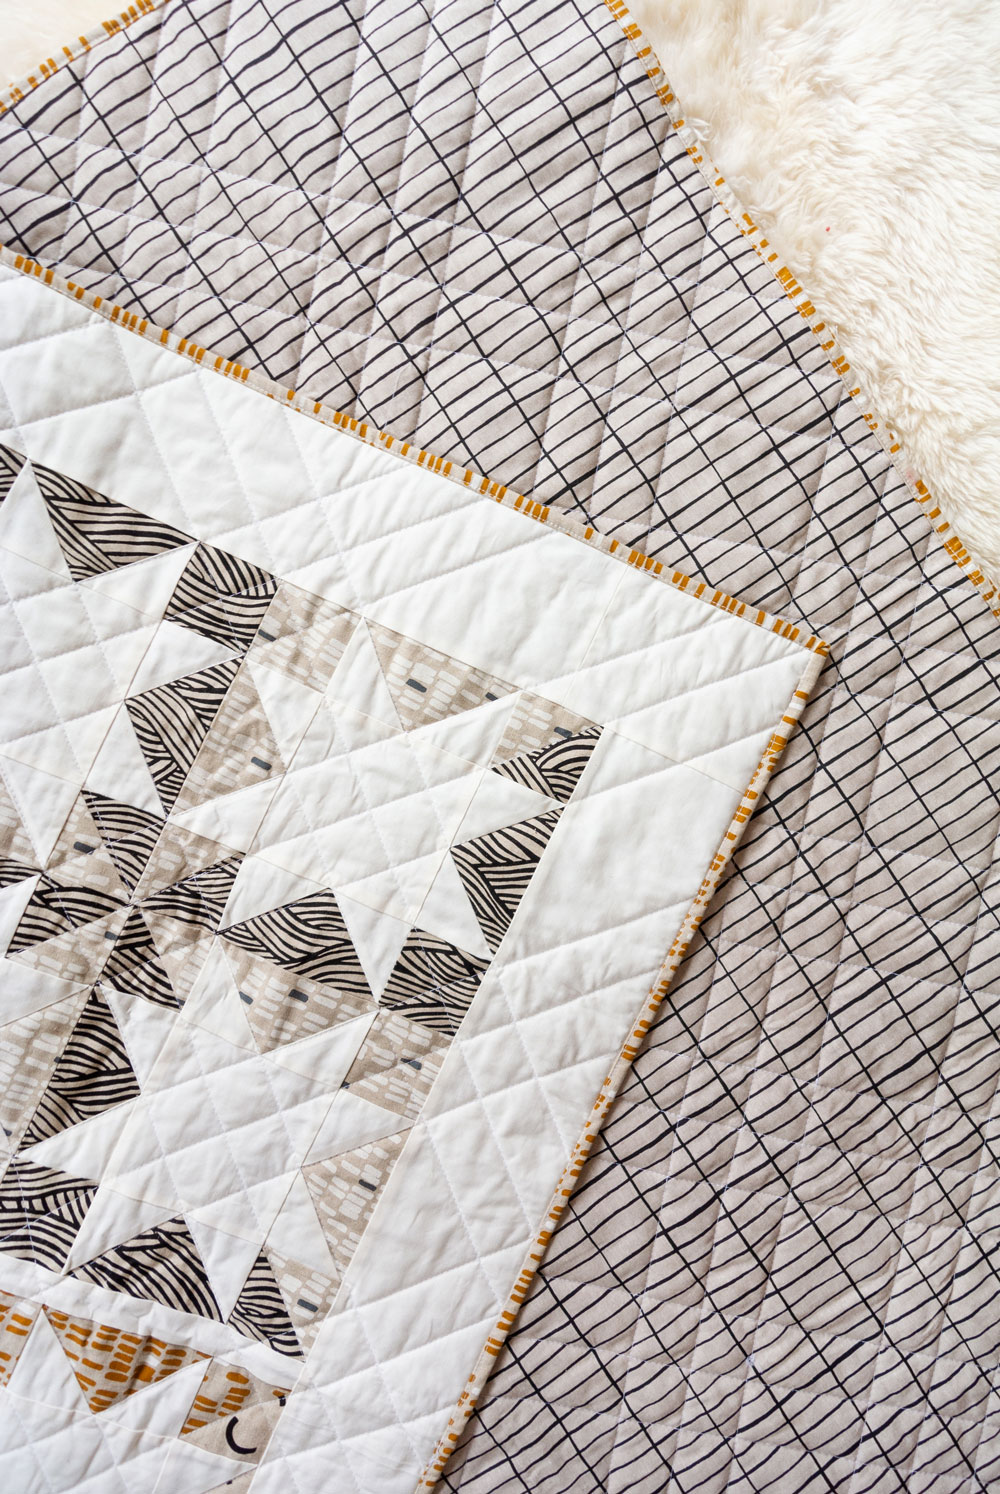 Make a sophisticated, neutral quilt using the Stars Hollow quilt pattern. This is a classic quilt pattern, but with a modern twist. The design plays on negative space to create traditional sawtooth star quilt blocks. suzyquilts.com #linen #quiltpattern